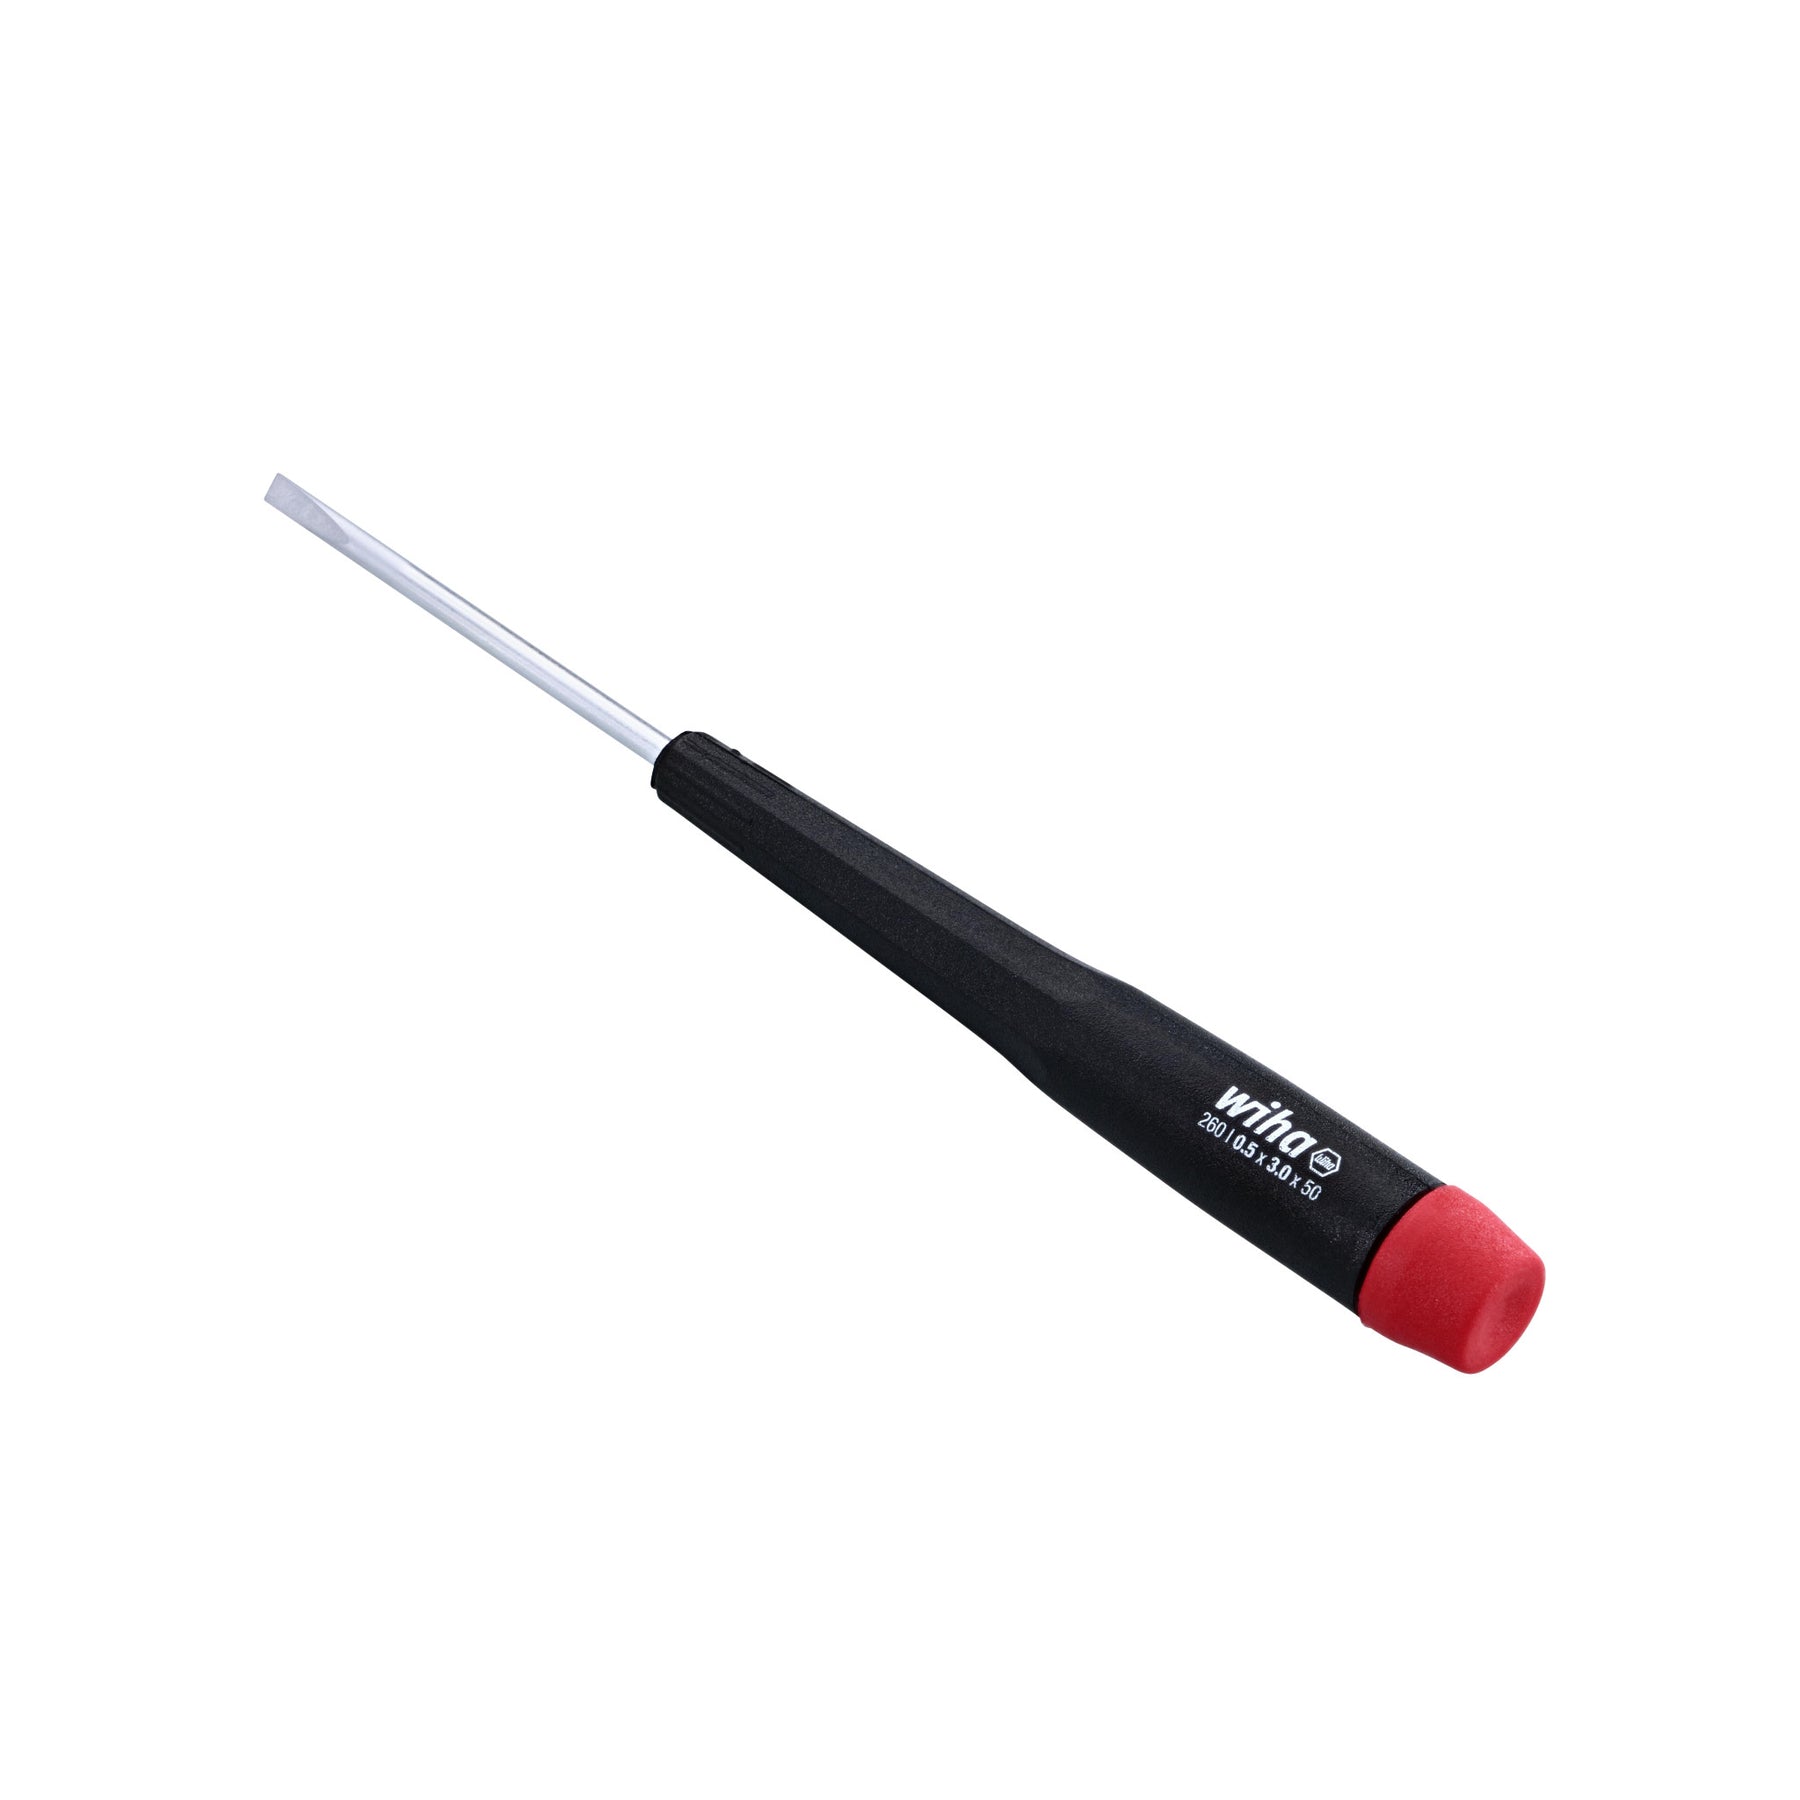 Precision Slotted Screwdriver 3.0 x 50mm